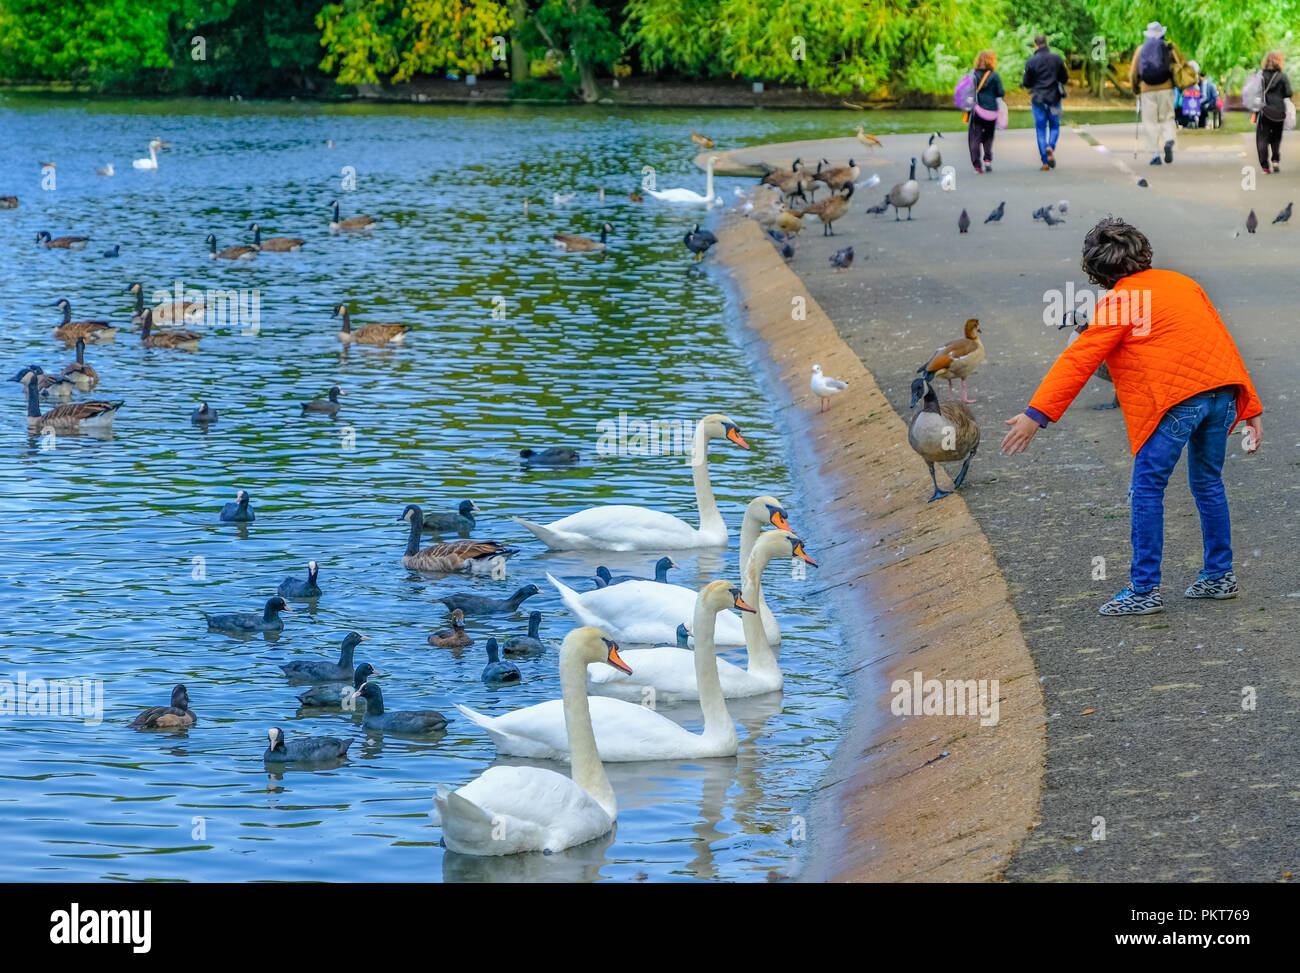 Boy wearing bright orange jacket feeds ducks and swans swimming in a pond in Regent's Park, London, England, at sunset; trees in the background Stock Photo